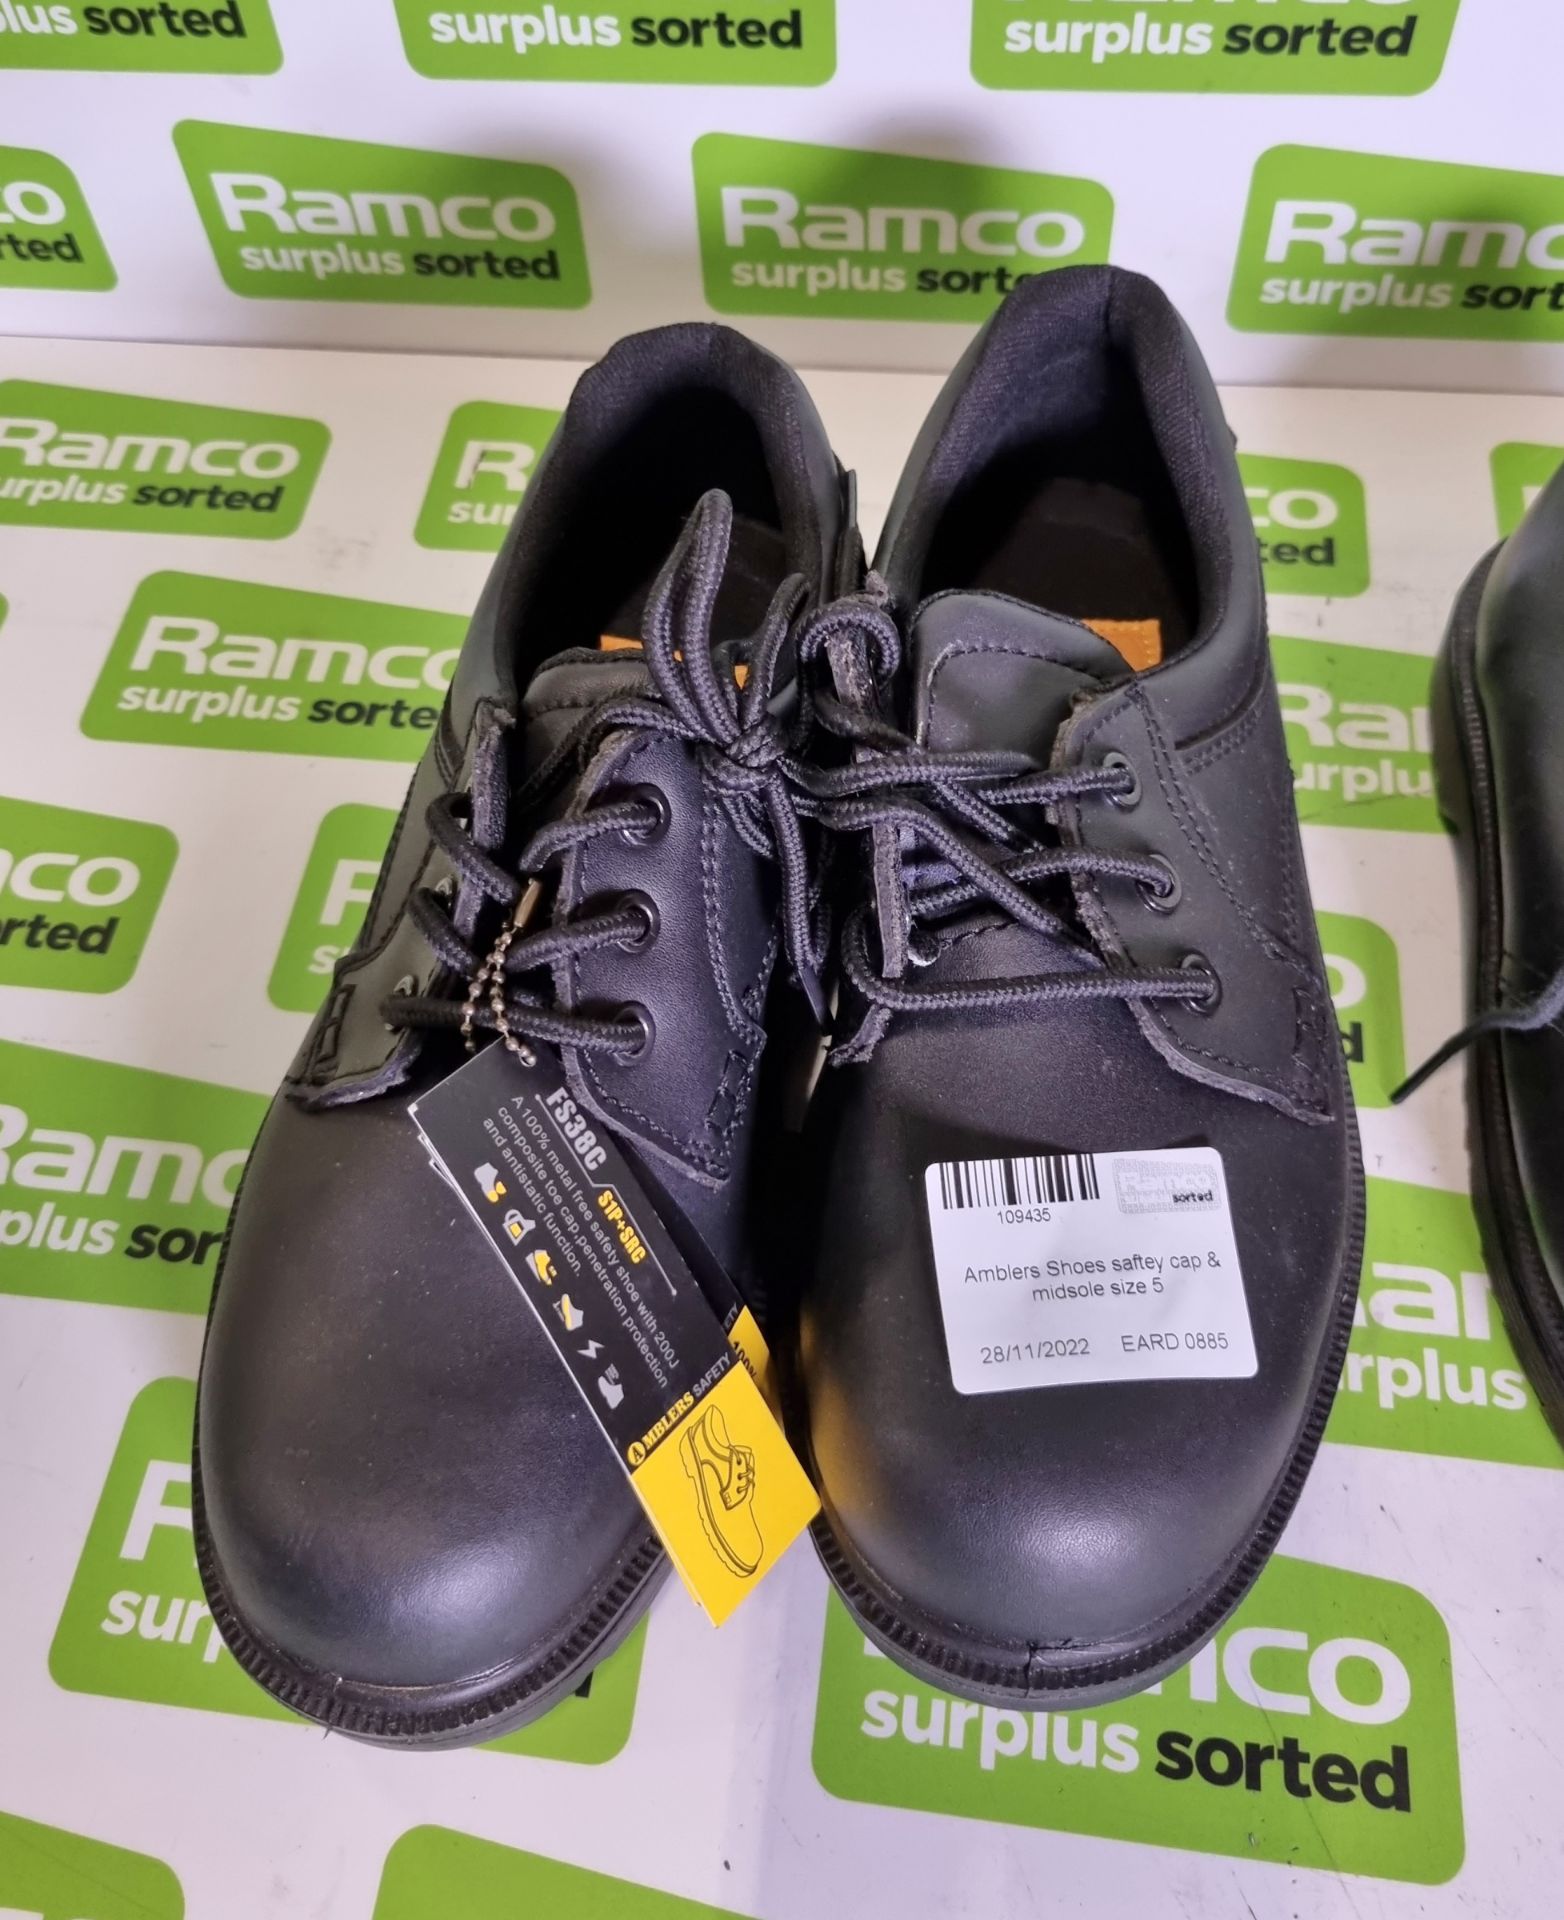 Goliath Footwear safety shoes size 6, Goliath Footwear safety shoes size 5, Amblers Shoes safety - Image 5 of 5